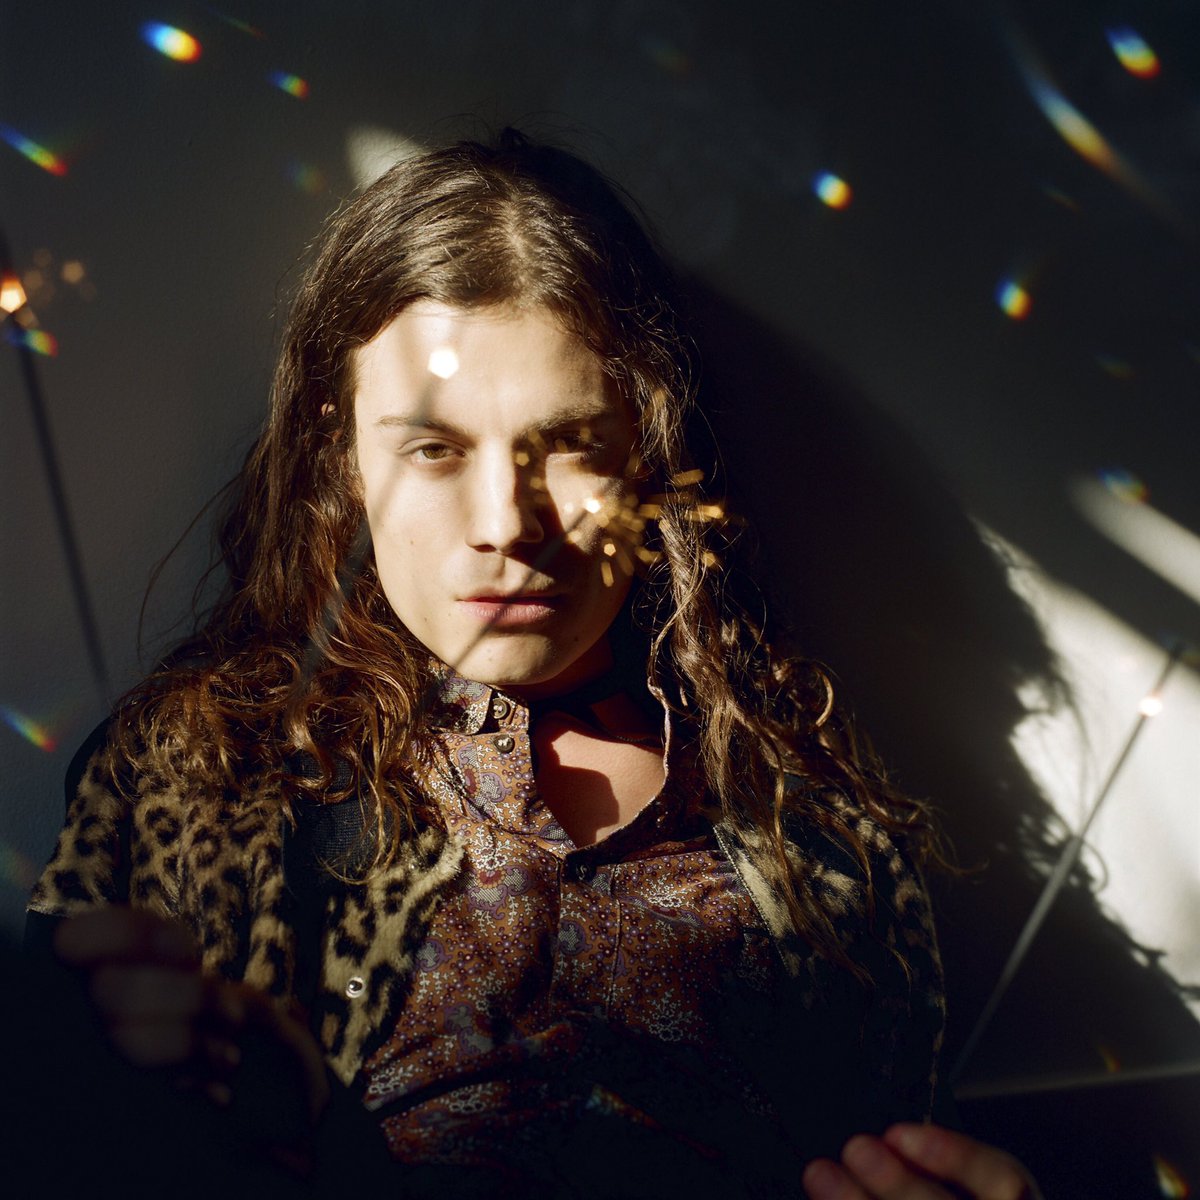 New shoot with 🔥 @bornsmusic 🔥 for #eightynine magazine 📸me - 120film ✨🌙✨